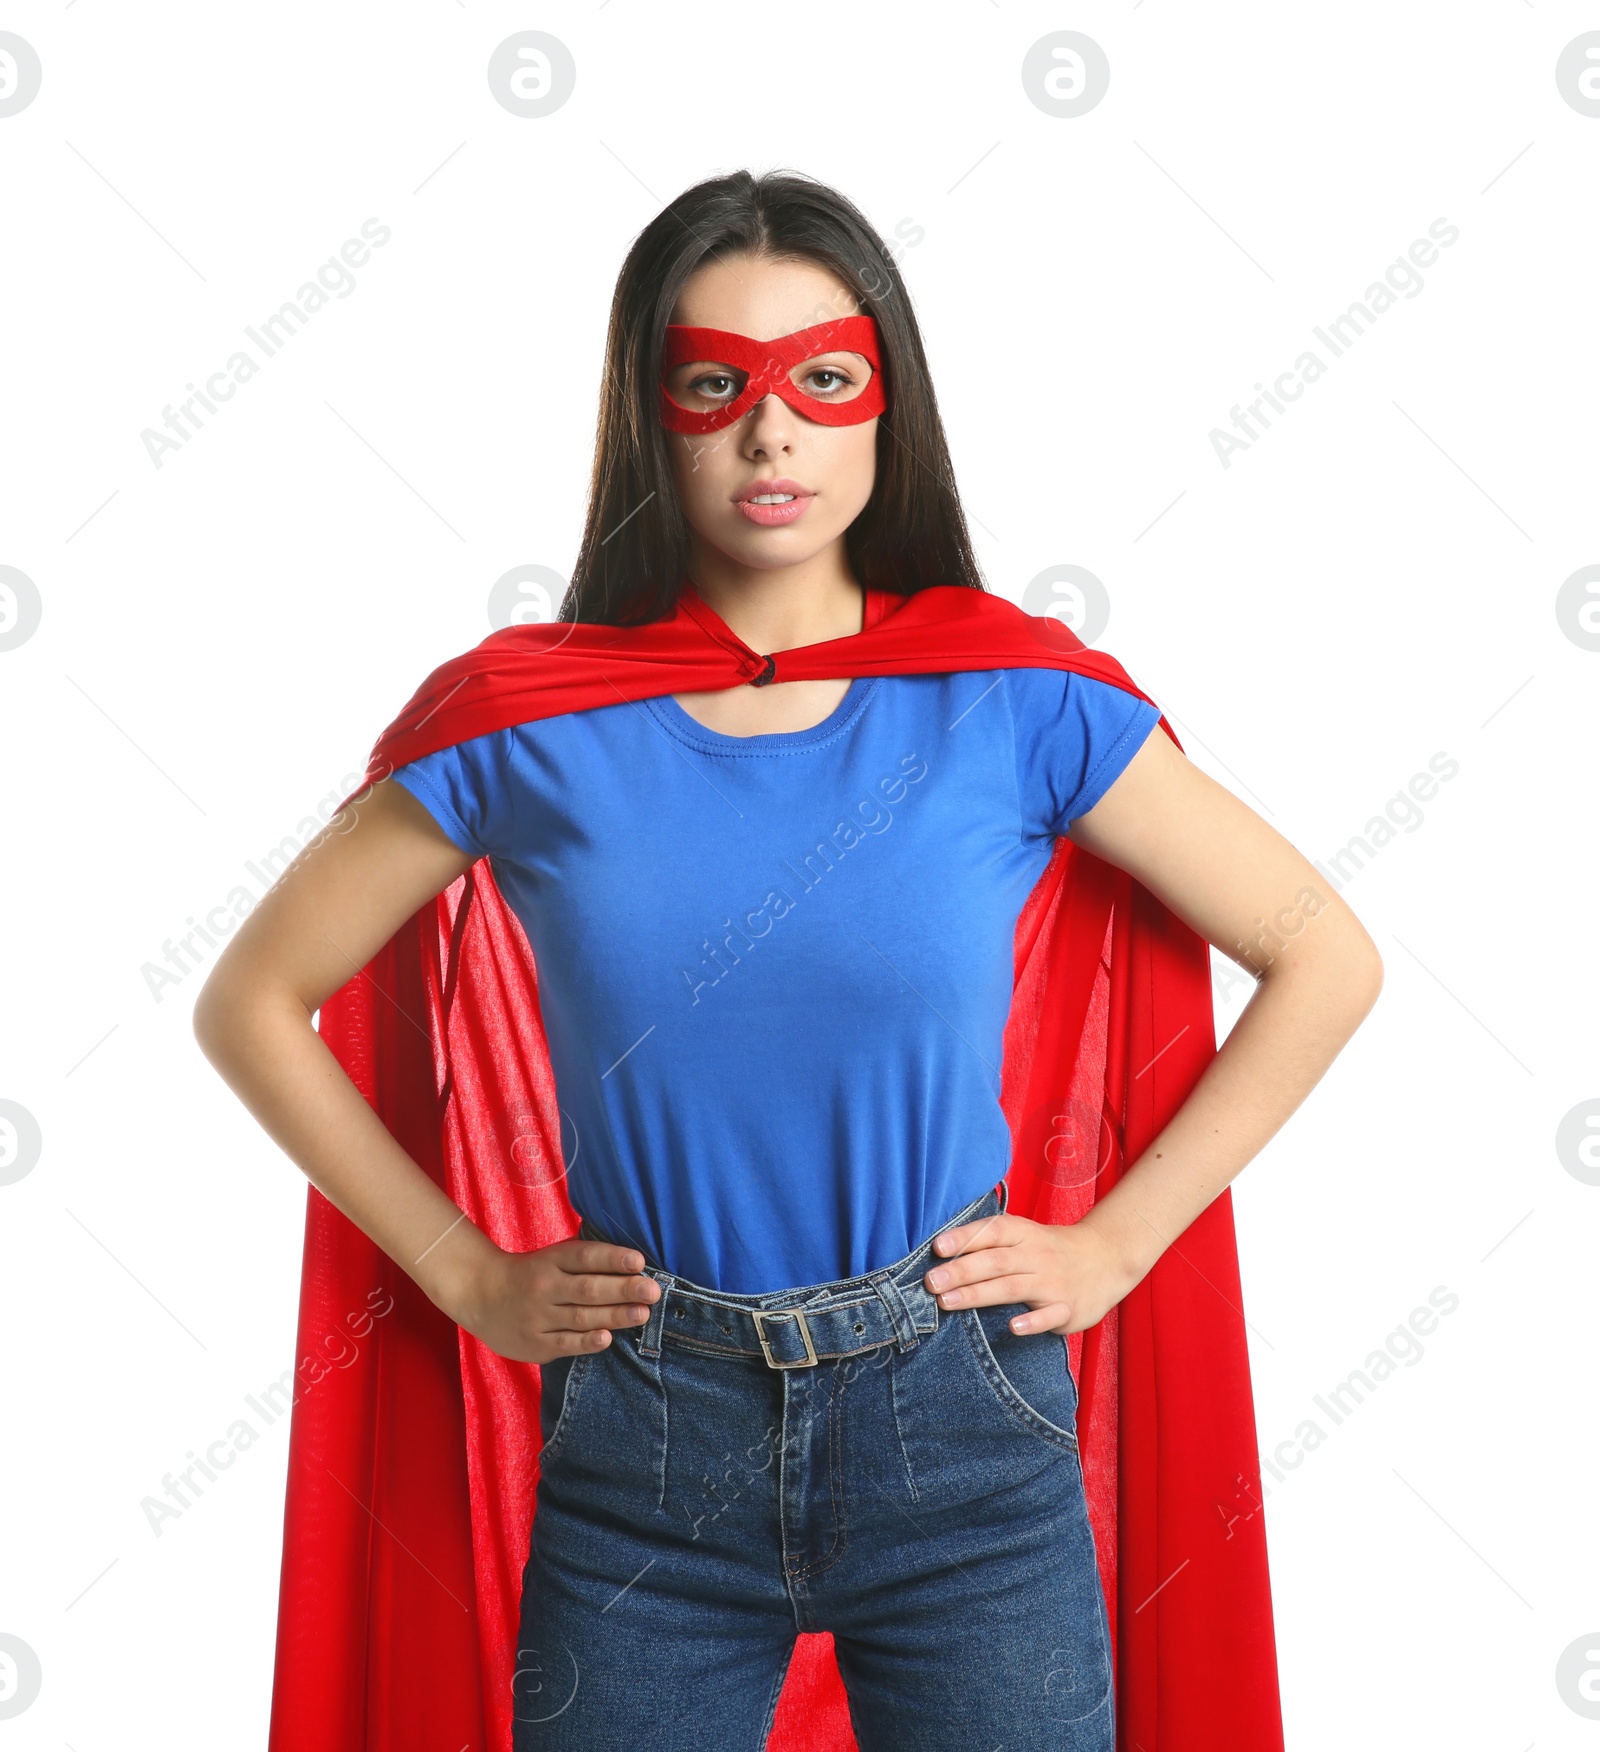 Photo of Confident young woman wearing superhero cape and mask on white background